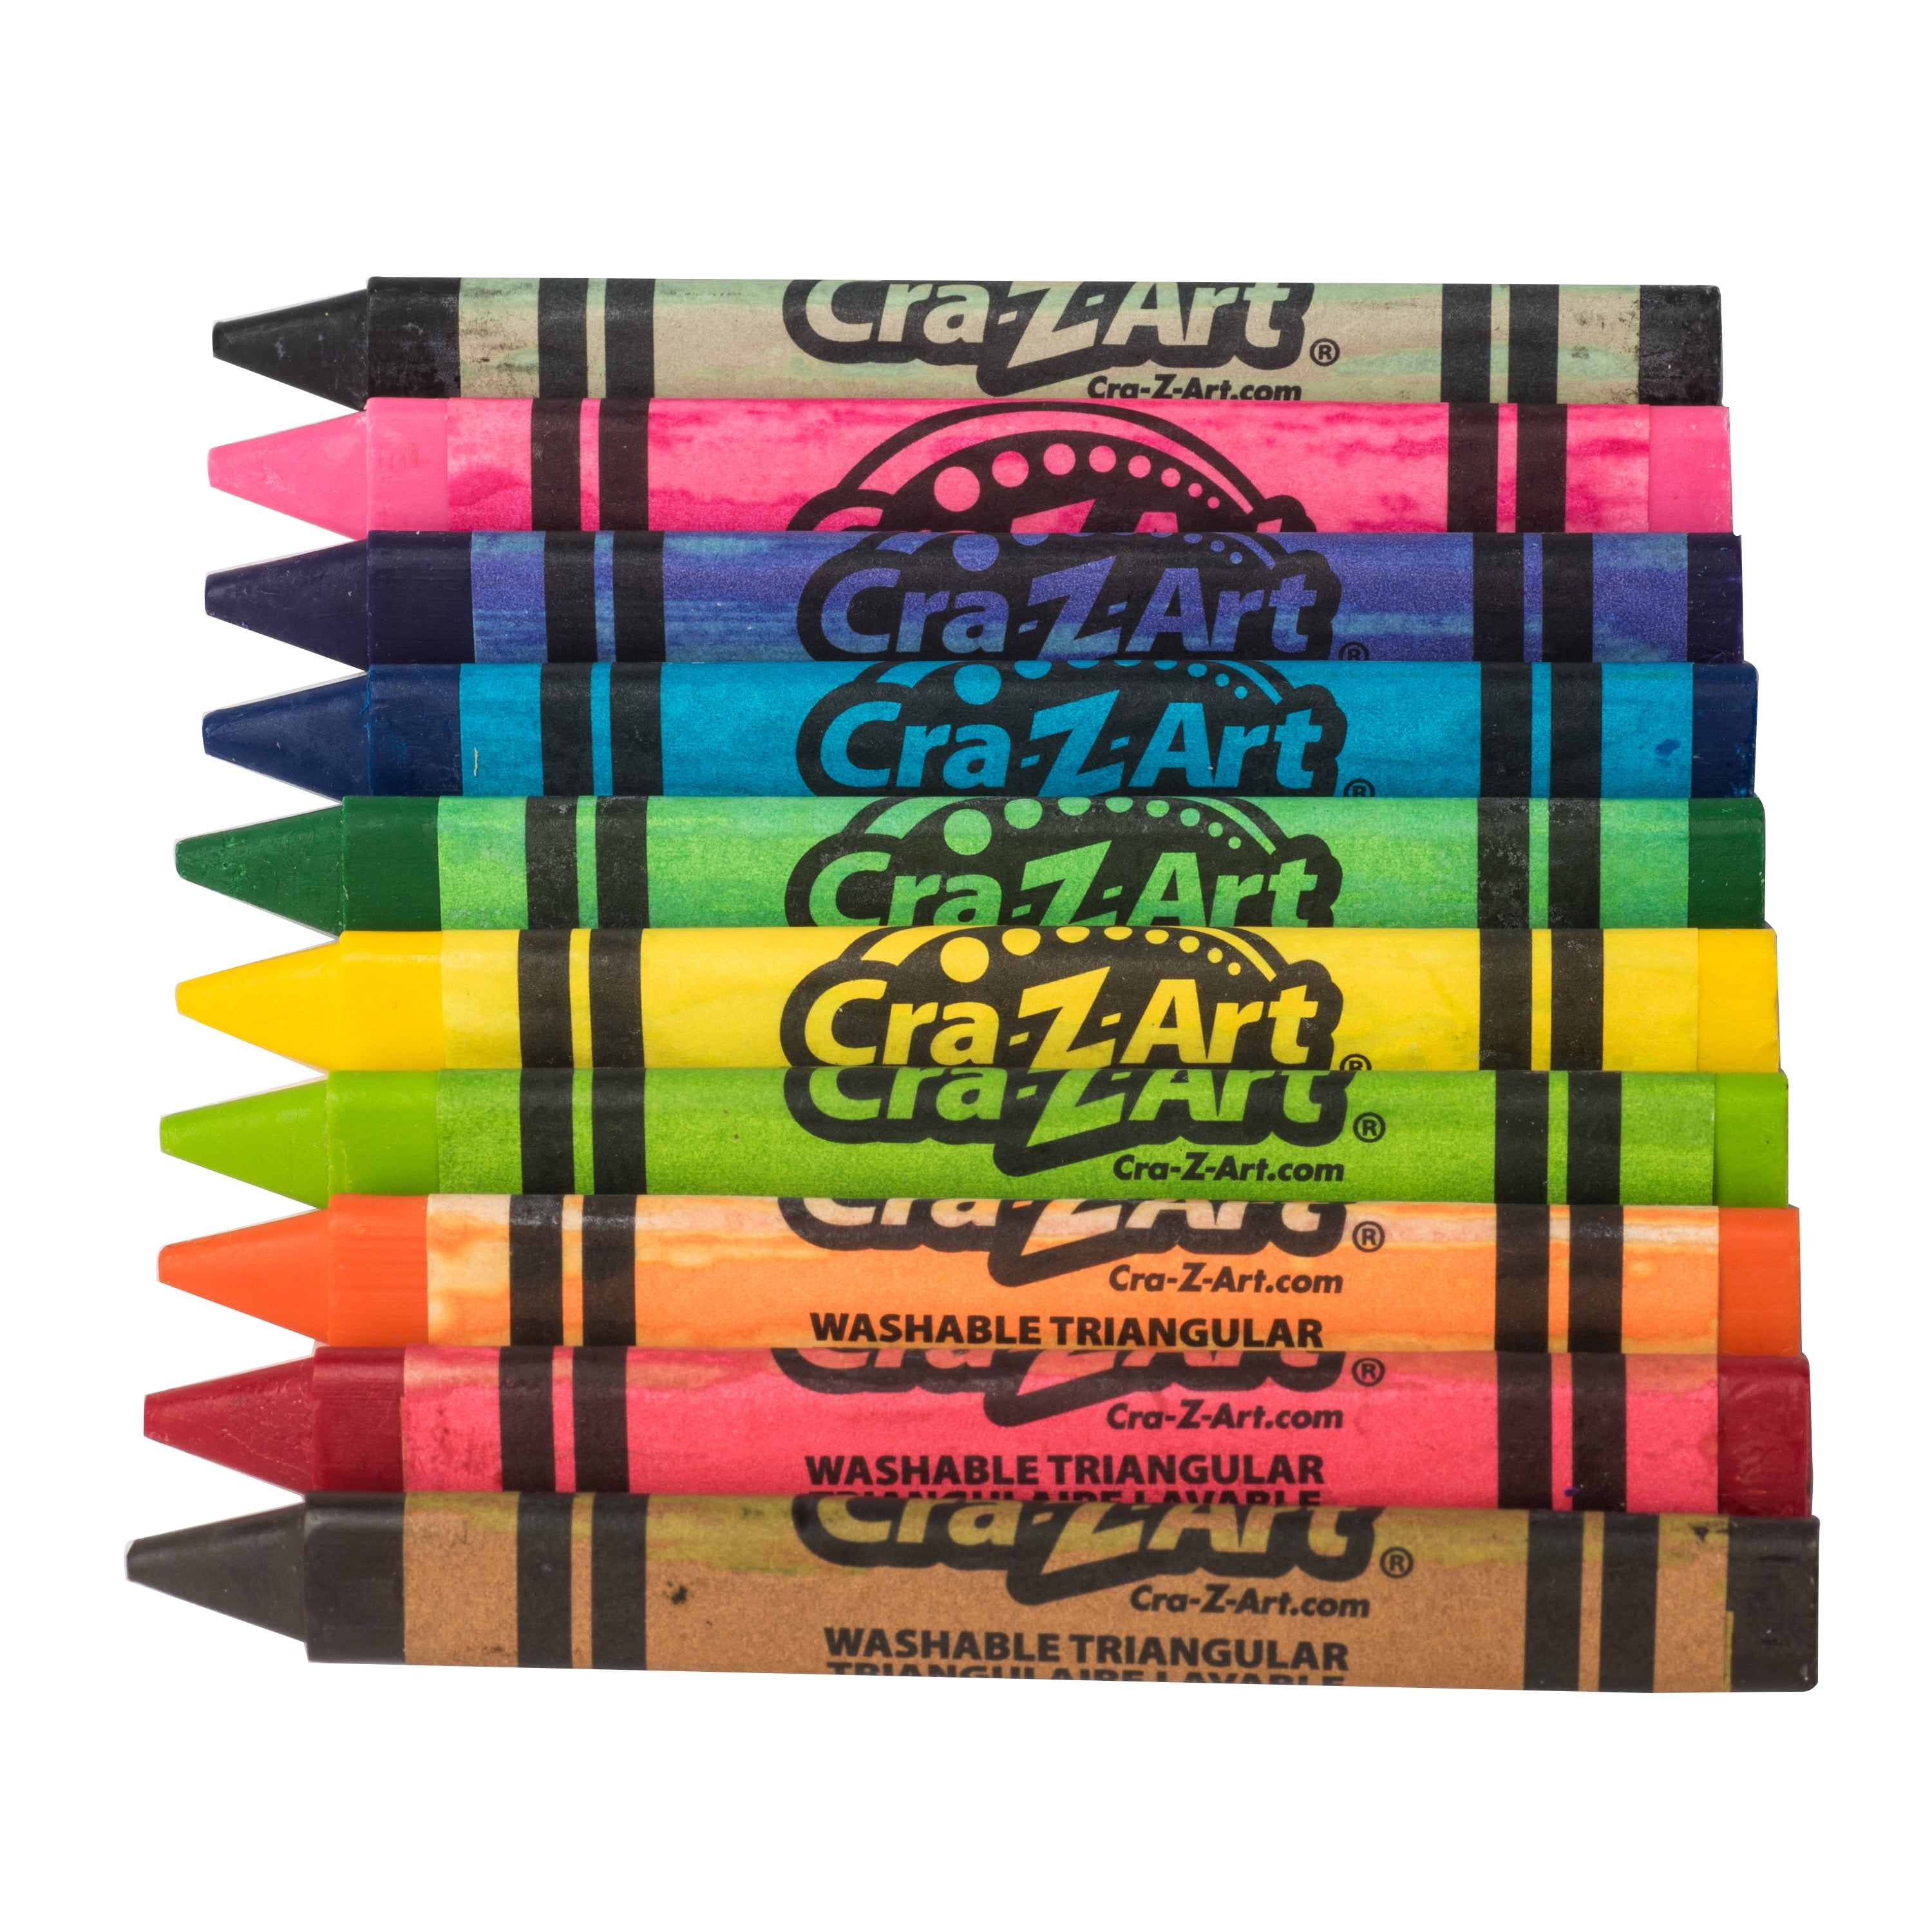 Cra-Z-Art Jumbo Washable Triangular Crayons, 10 Count, Assorted Colors,  Back to School Supplies 